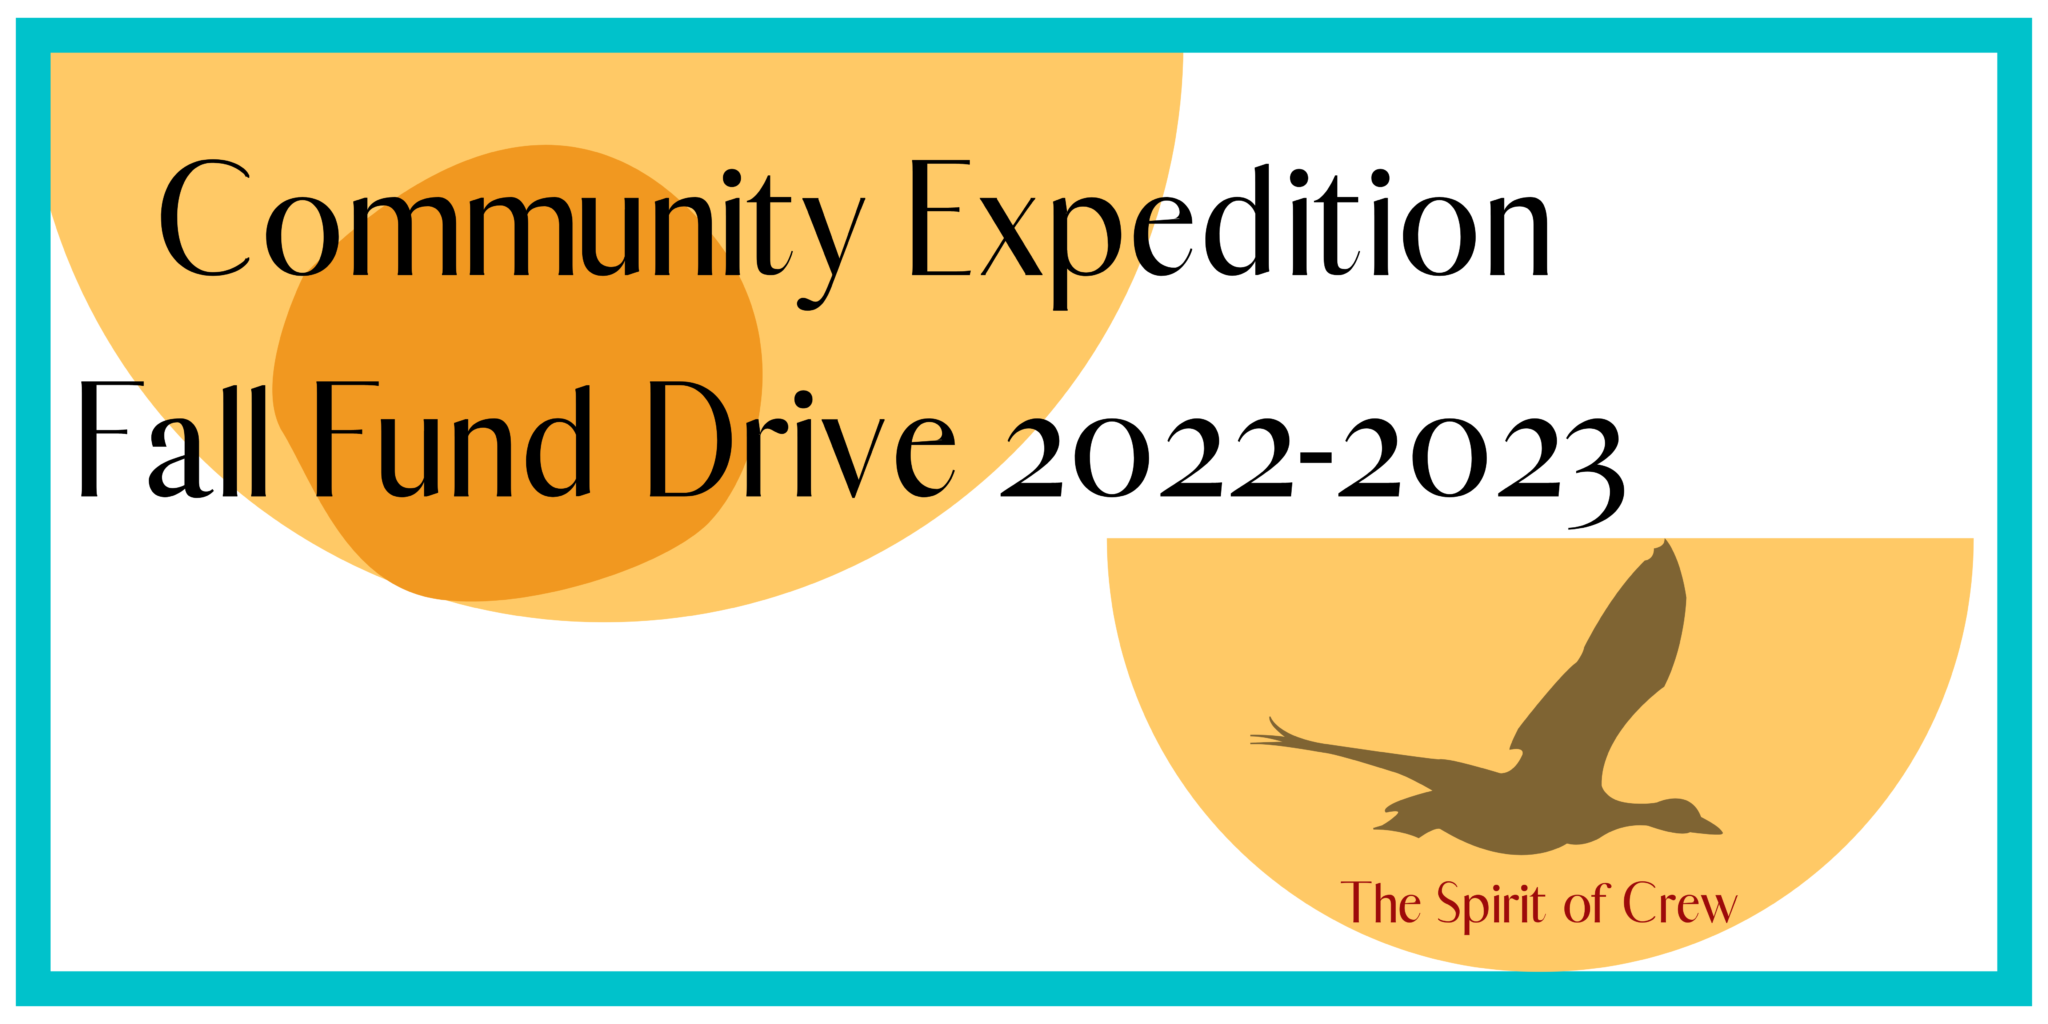 Community Expedition Fall Fund Drive 20222023 Anser Charter School